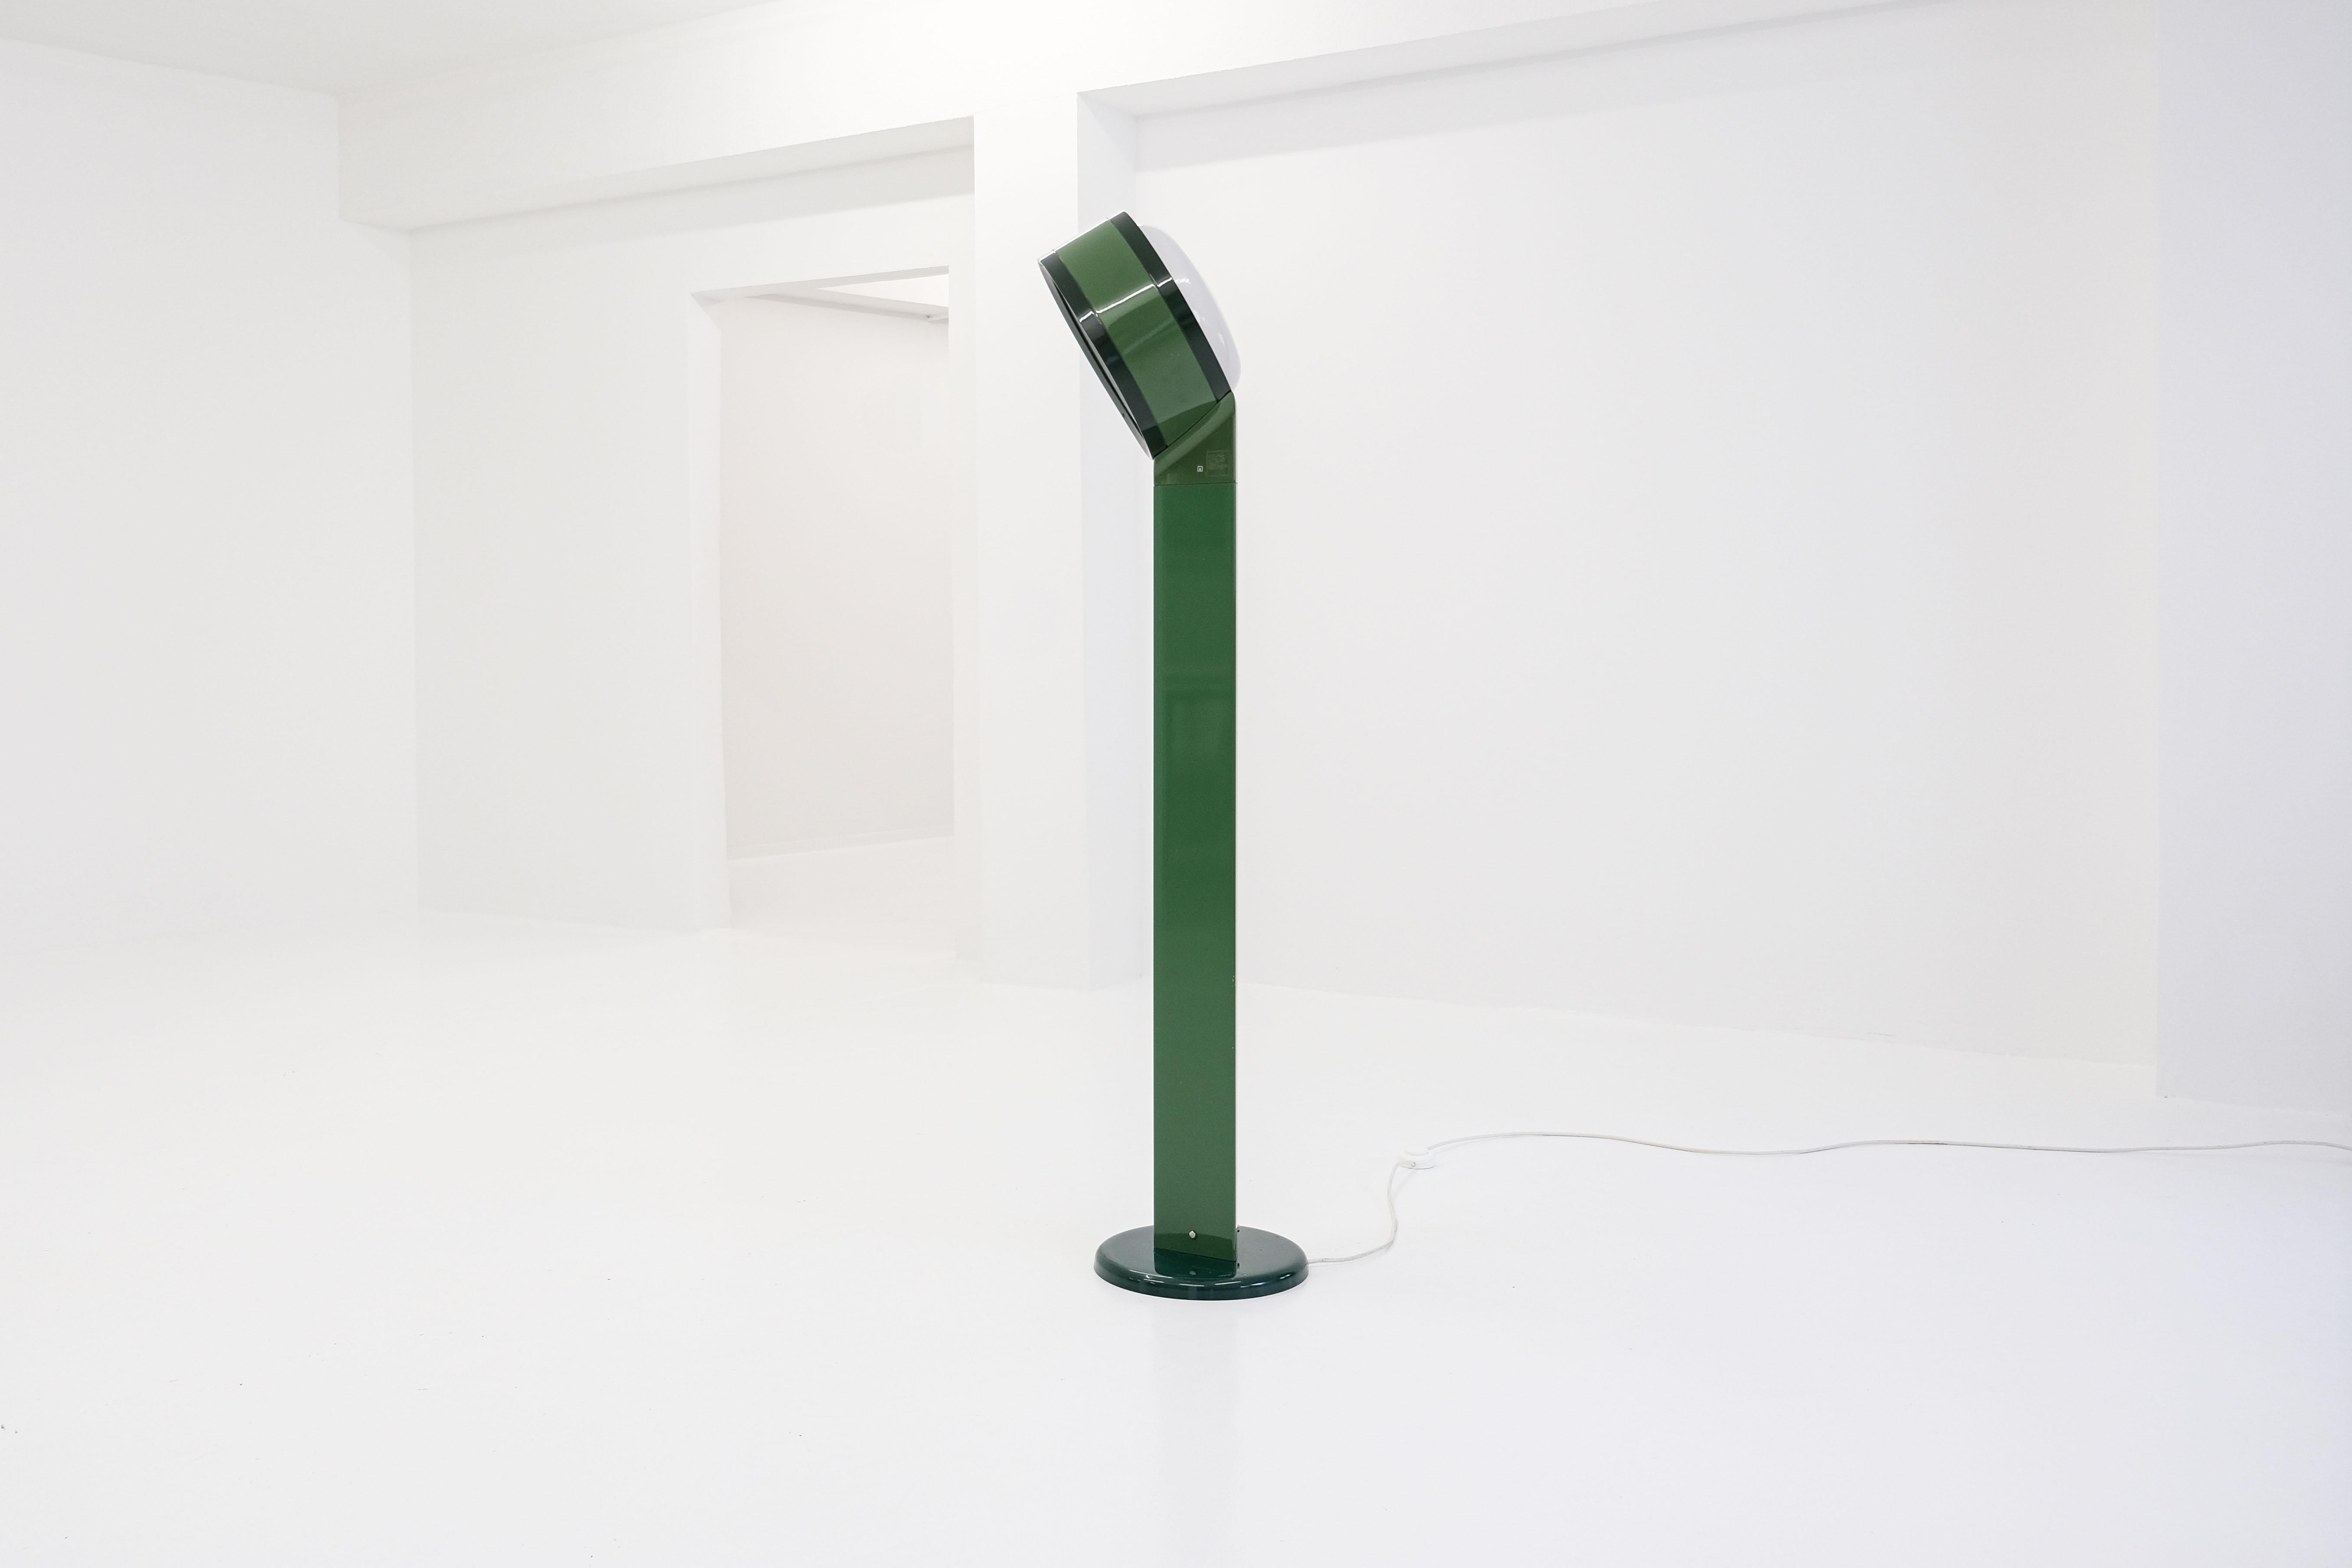 Mid-Century Modern Tamburo Floor Lamp by Afra & Tobia Scarpa for Flos for Inside and Outside Use